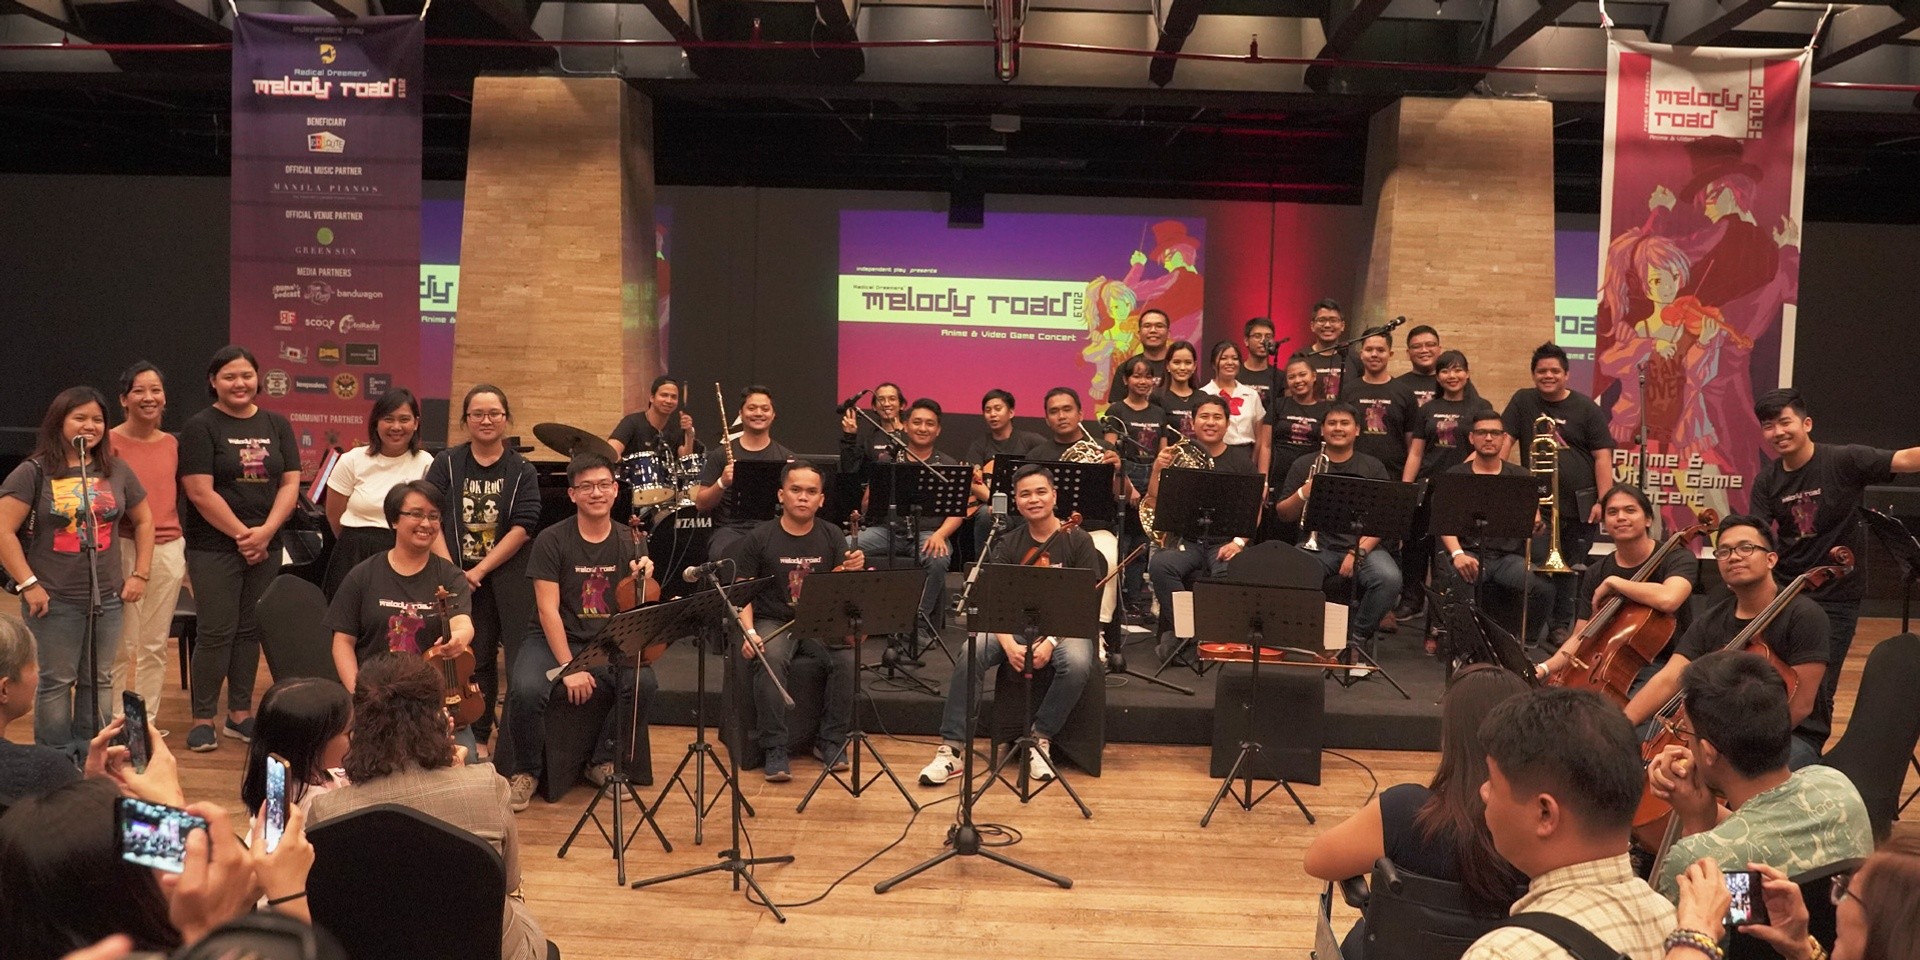 Animé fans celebrate their favorite soundtracks at Melody Road Chamber Orchestra Concert